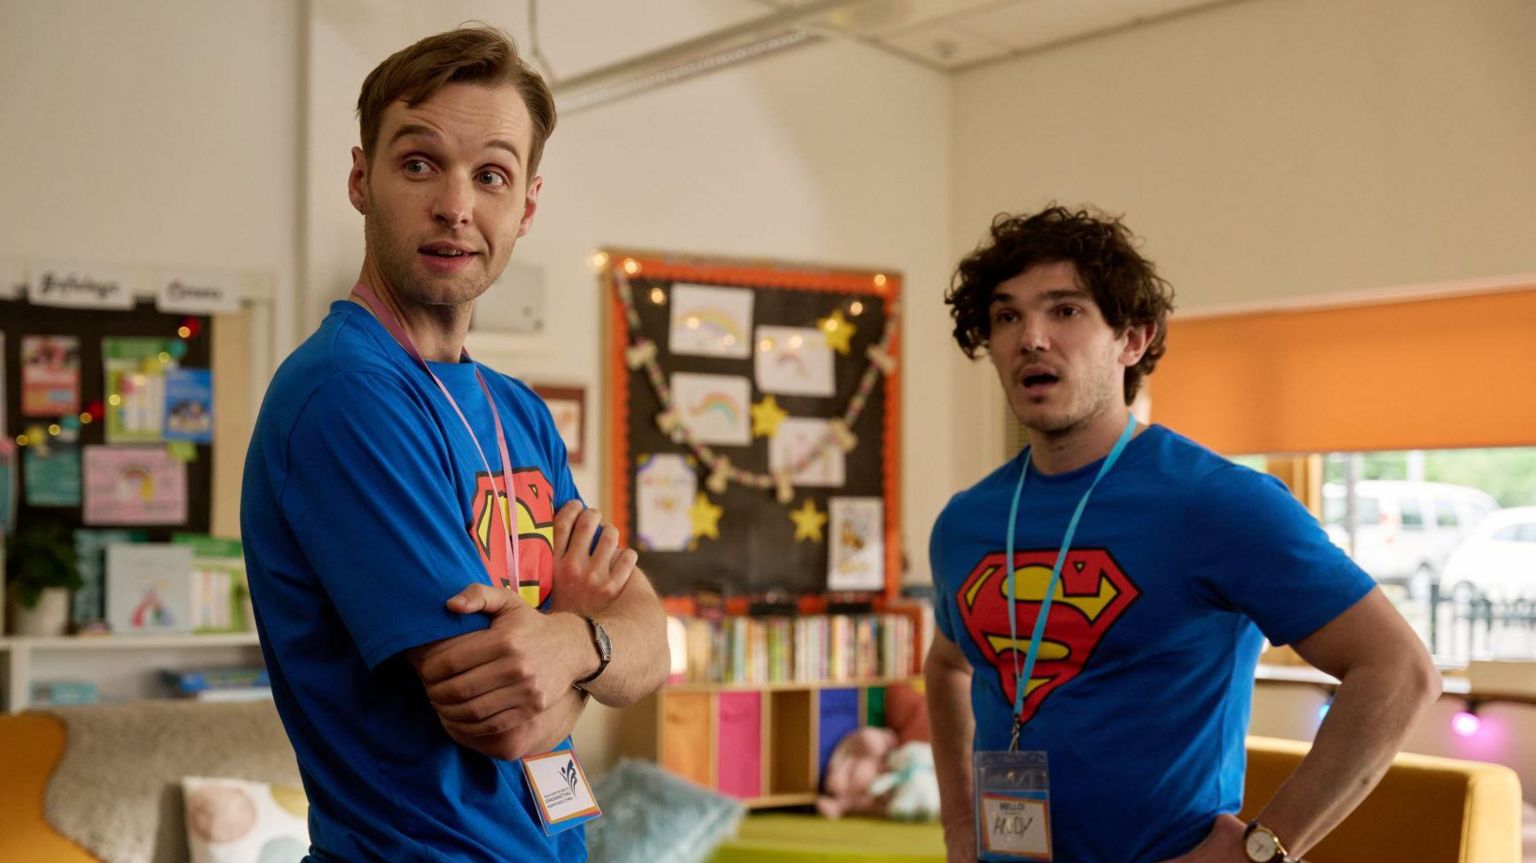 Left to right: Gabriel (played by Sion Daniel Young) and Andy (played by Fra Fee)